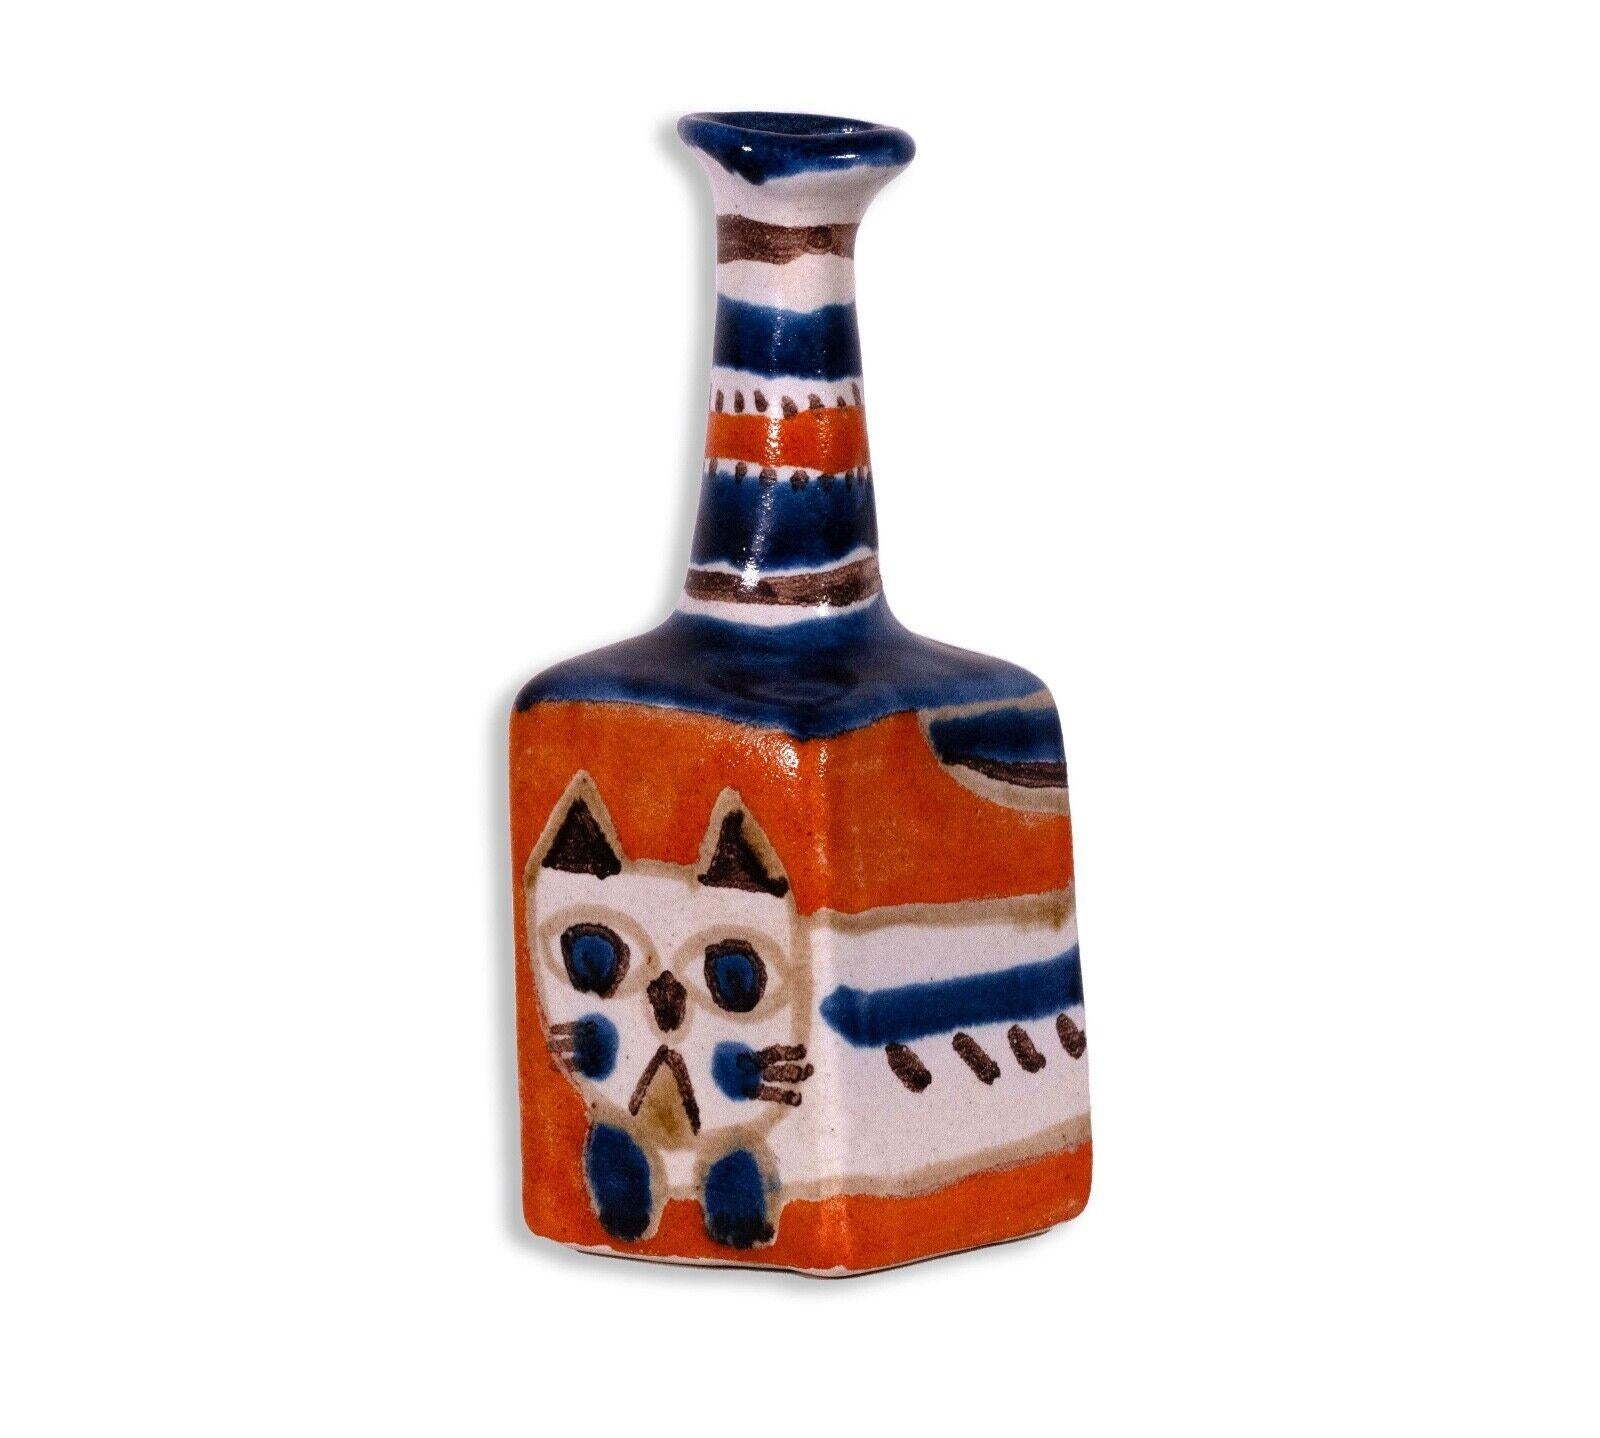 The Desimonte Vase Italy captures the essence of Italian charm and creativity, showcasing a delightful fusion of ceramic artistry and feline whimsy. This exquisite vase features a hand-painted portrayal of a playful cat, its mischievous expression